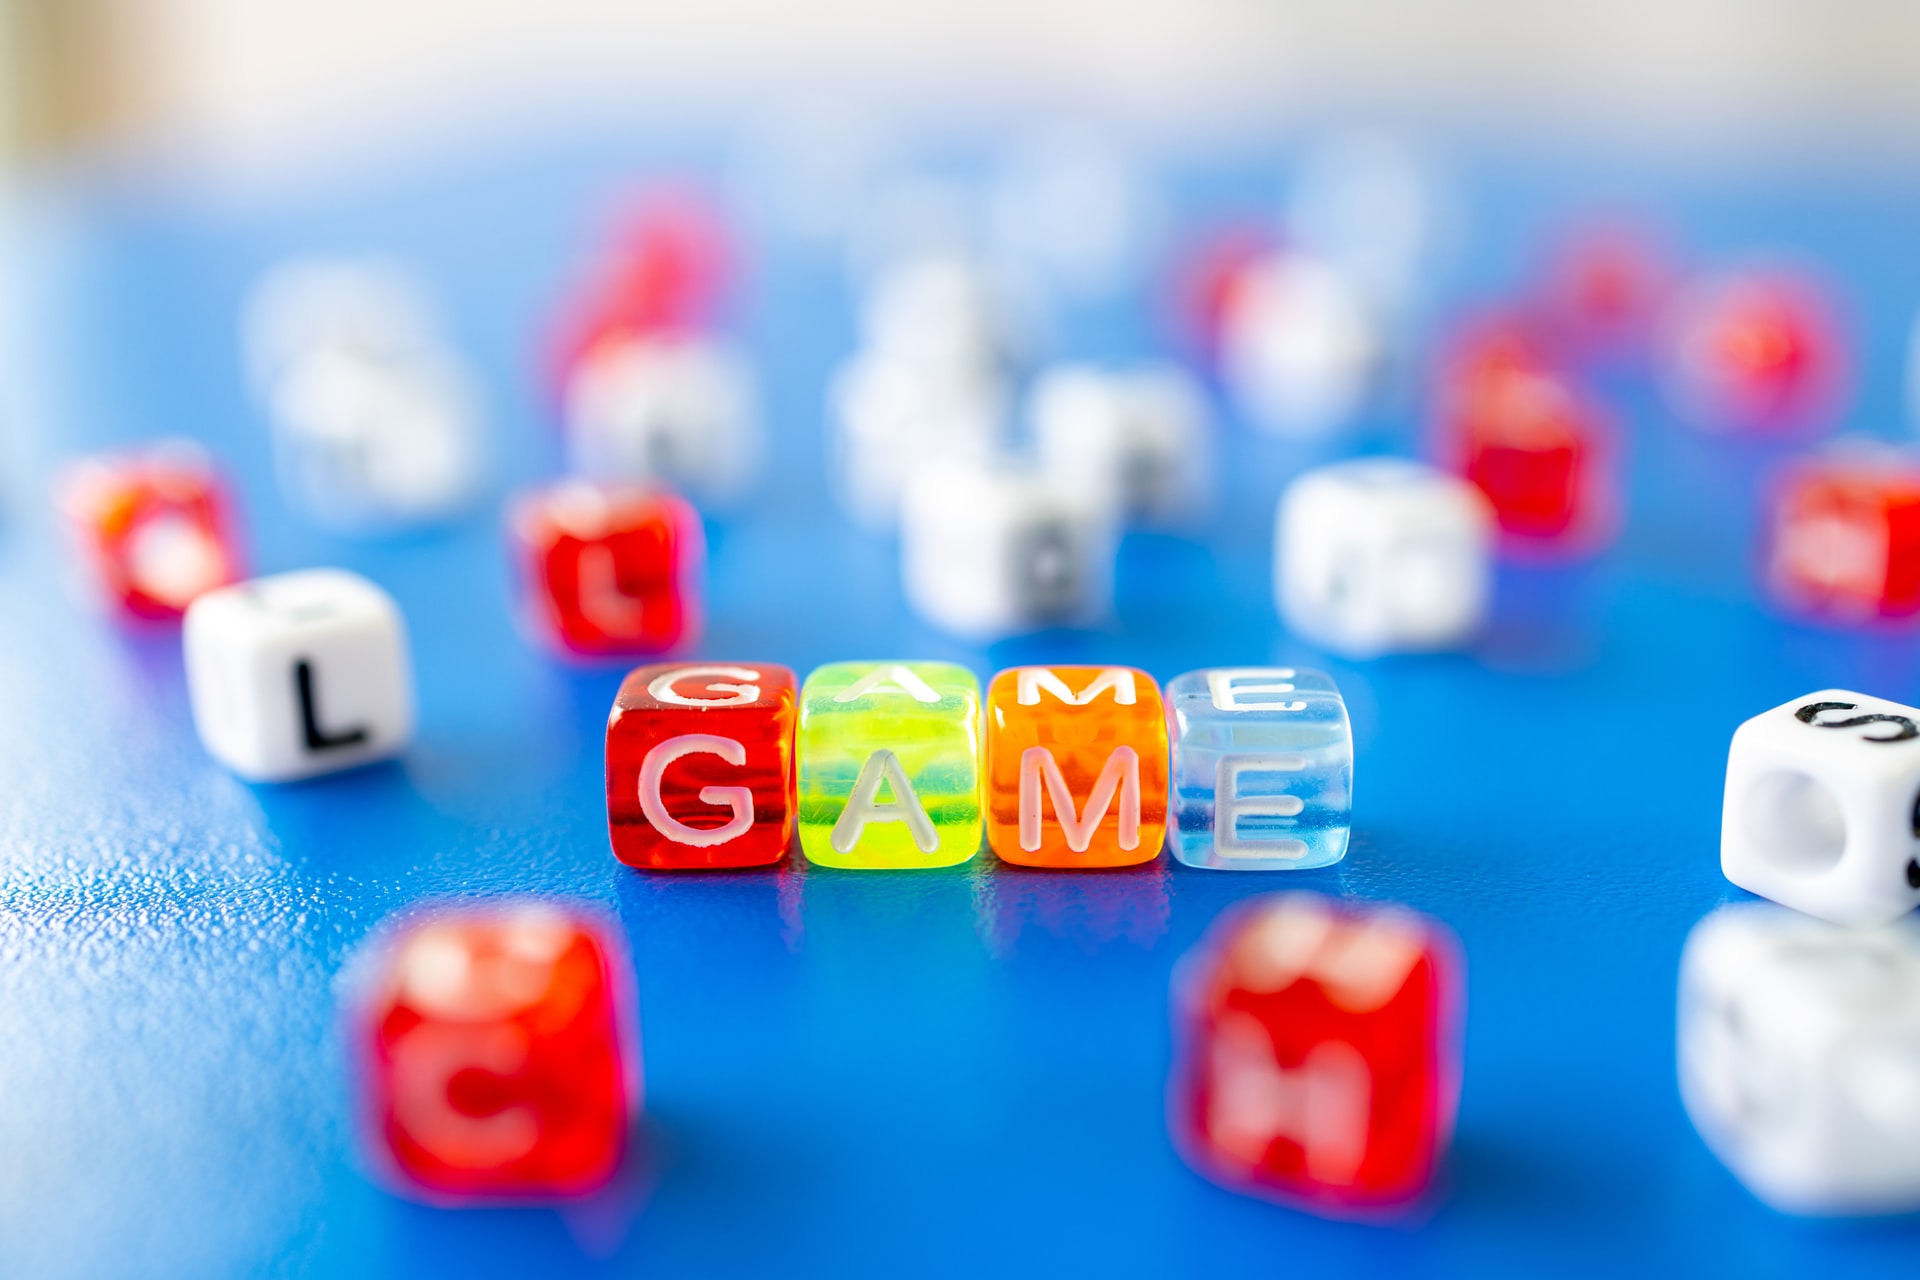 Letter dice spelling out the word "GAME".